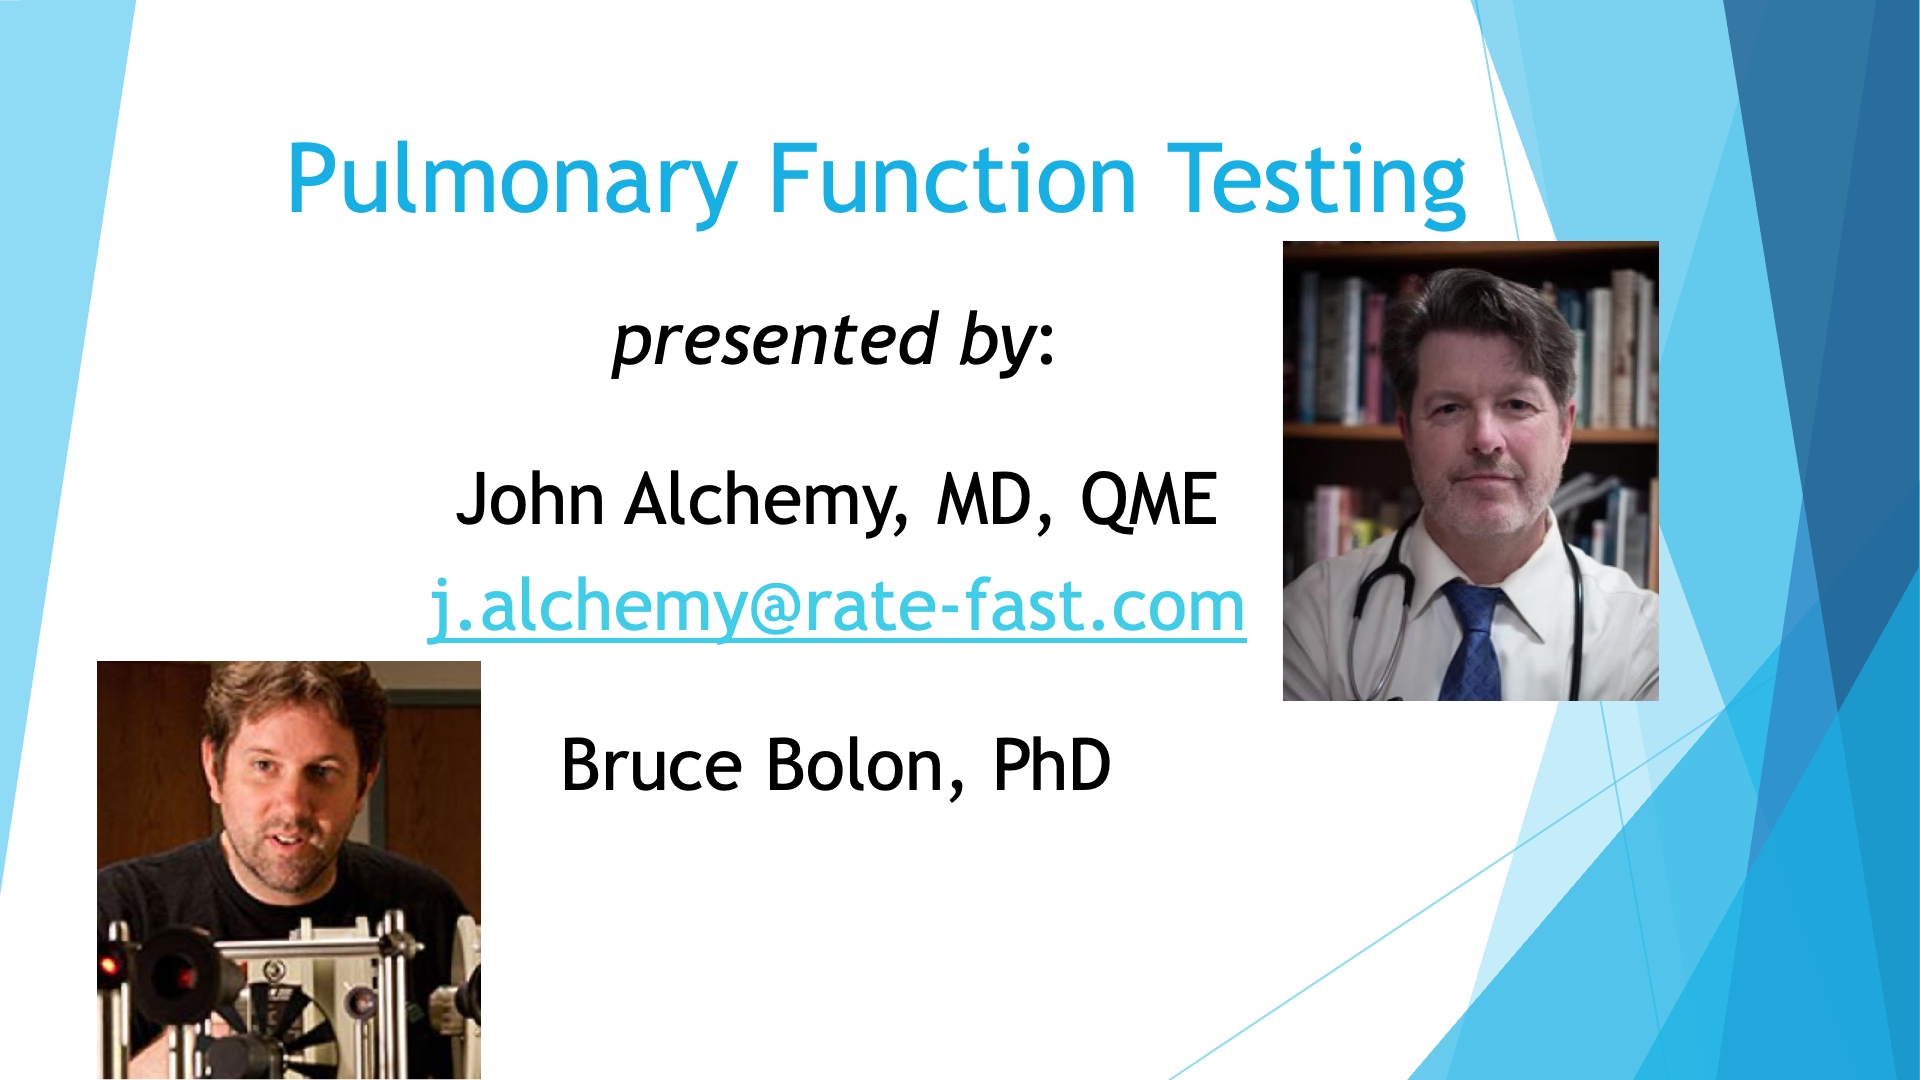 RateFast Podcast (and Video!): Pulmonary Function Testing